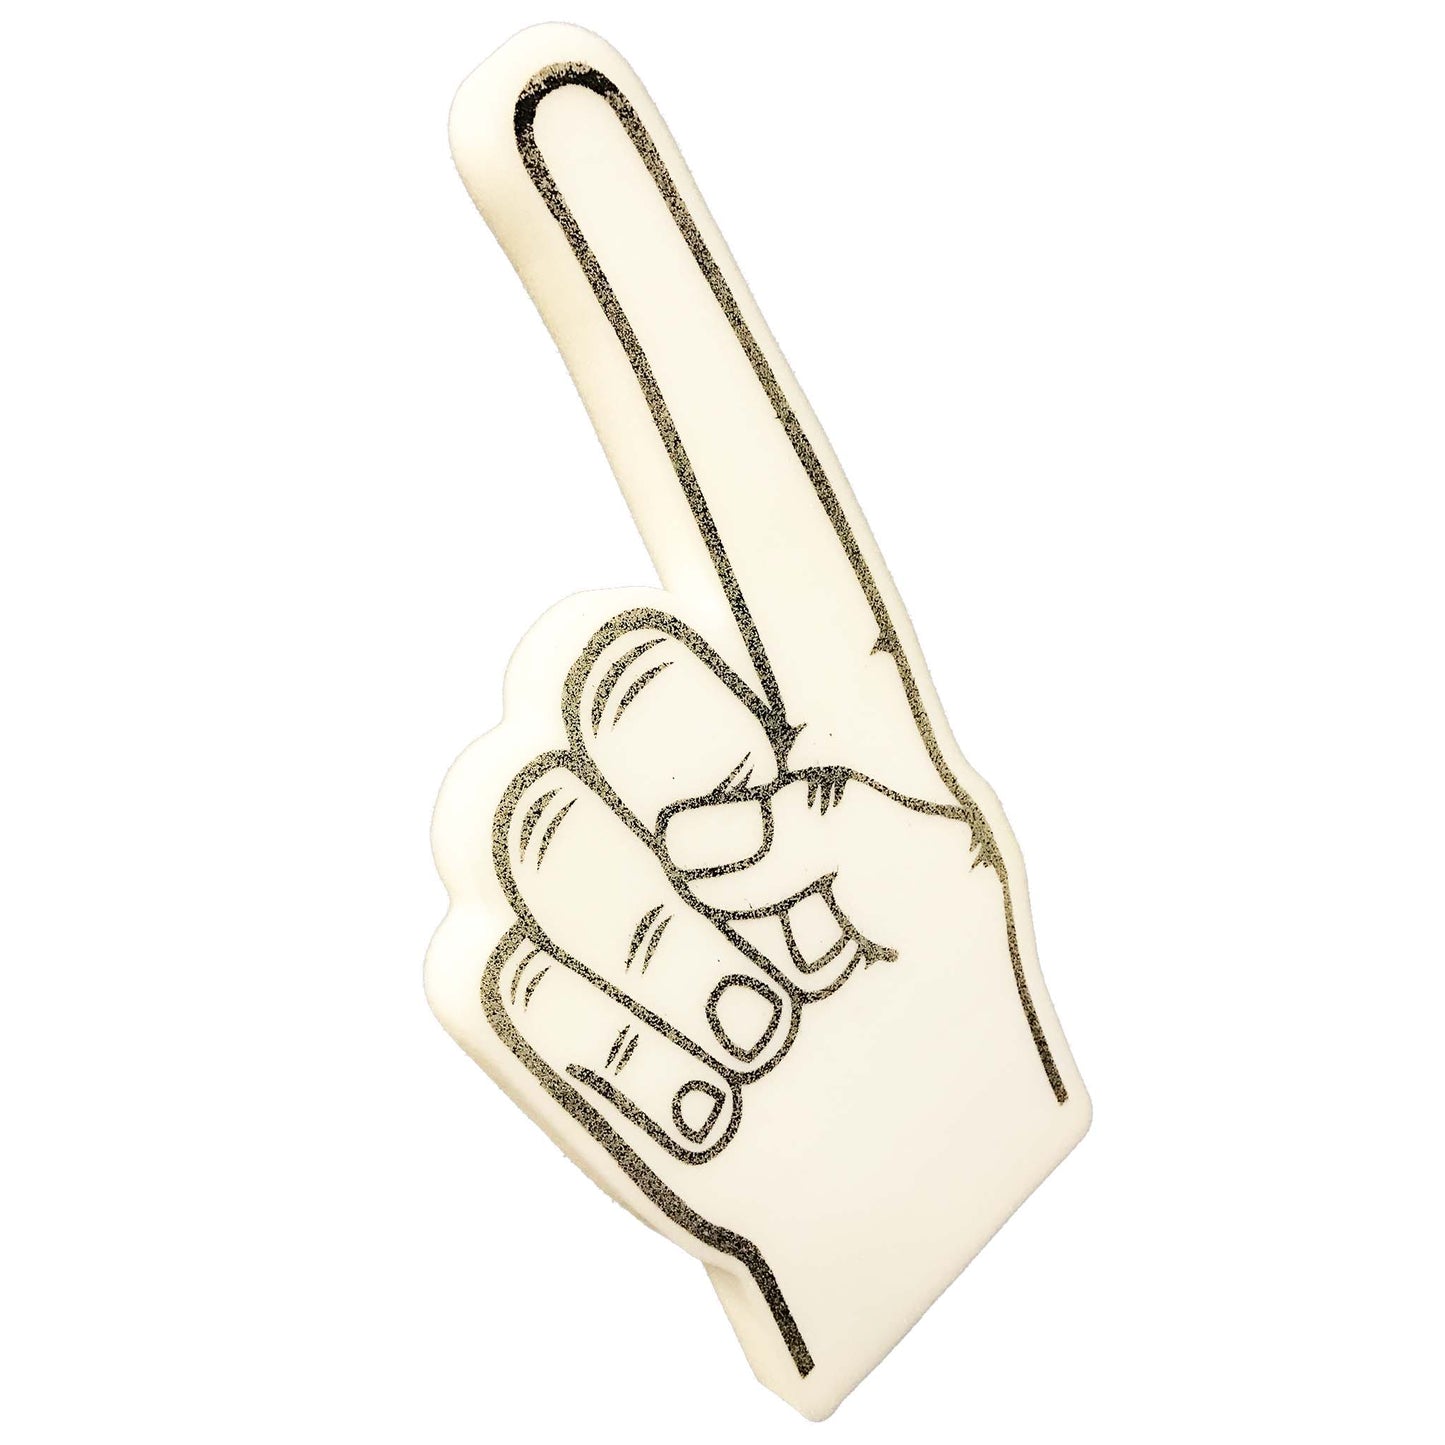 Pointy Palm Printed Foam Finger